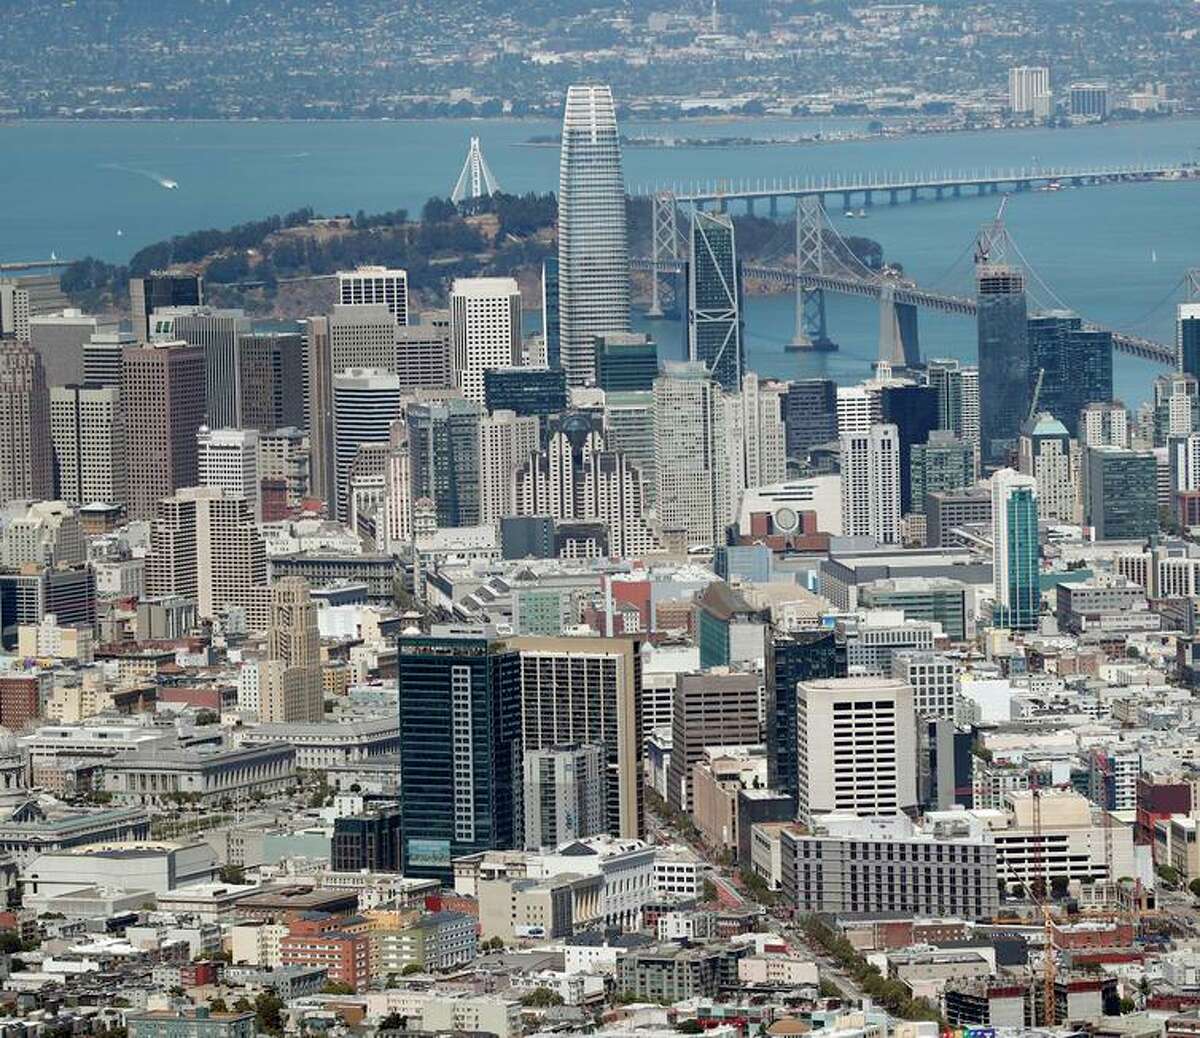 San Francisco’s office vacancy rose to 20.1% in the second quarter and is likely to hit 23%, according to real estate brokerage Cushman & Wakefield.